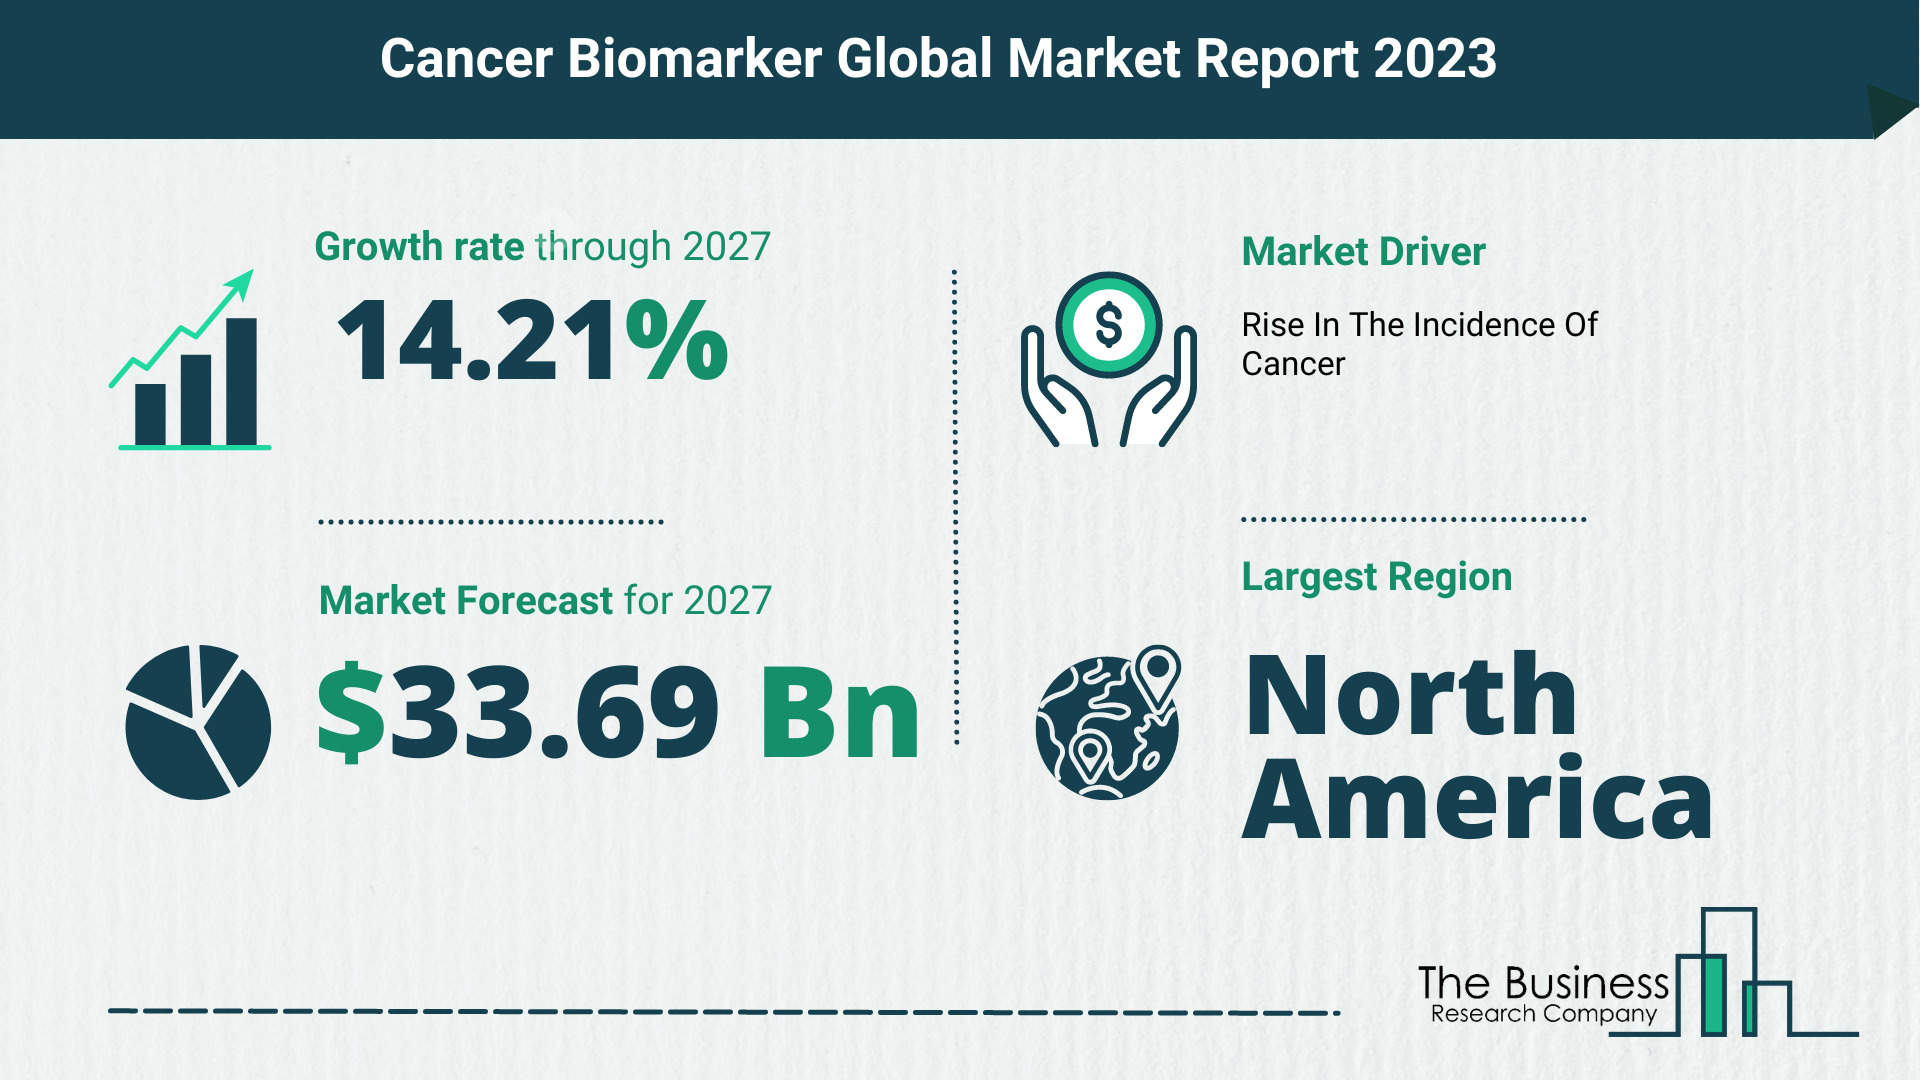 Cancer Biomarker Market Size, Share, And Growth Rate Analysis 2023